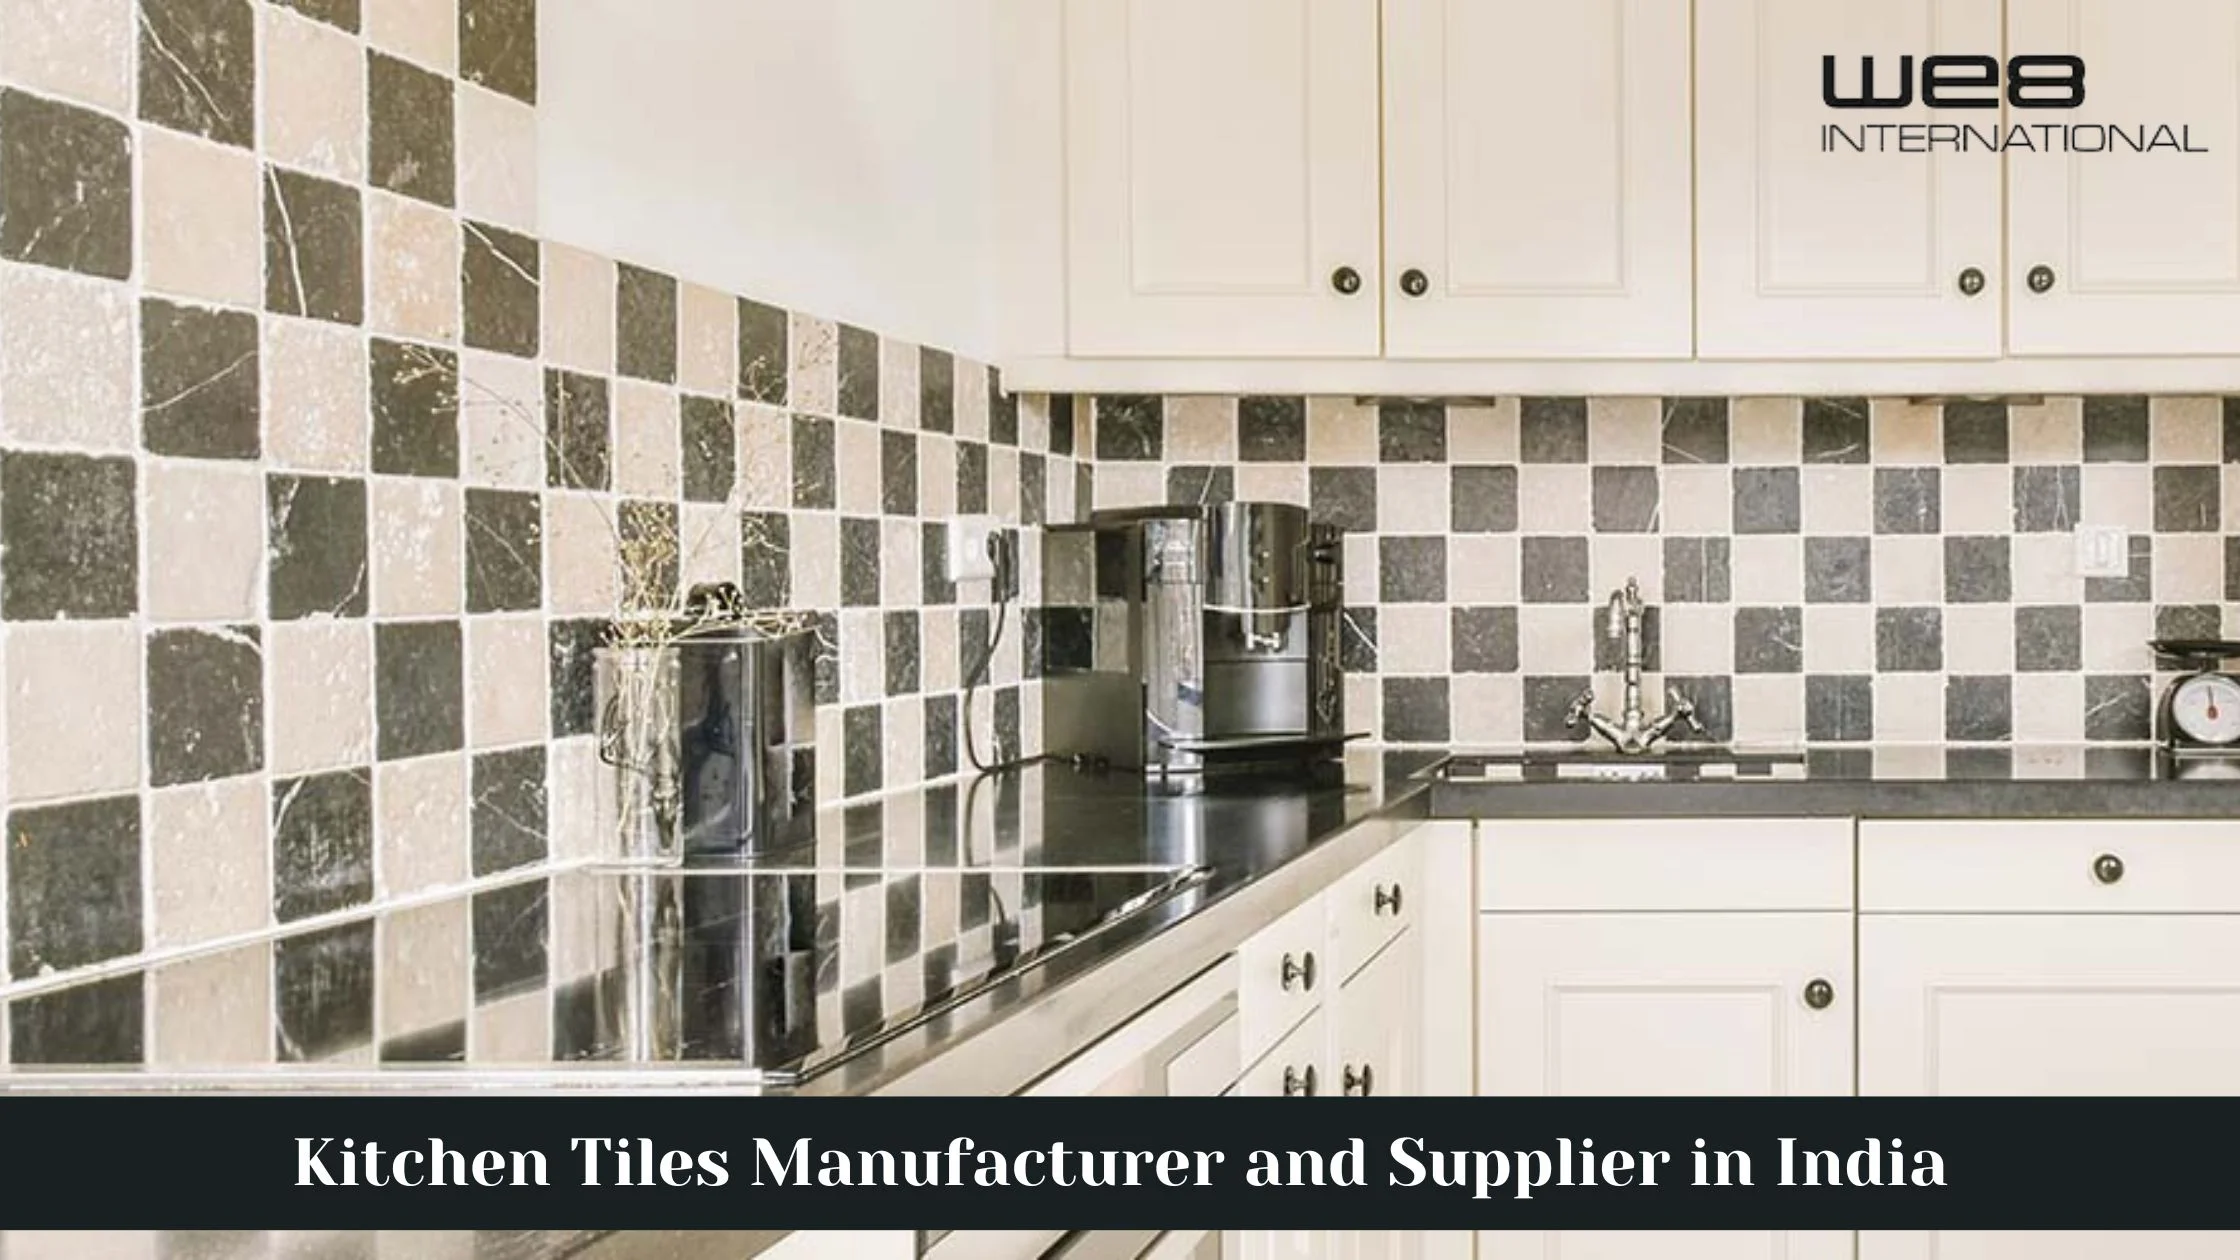 Kitchen Tiles Manufacturer and Supplier in India